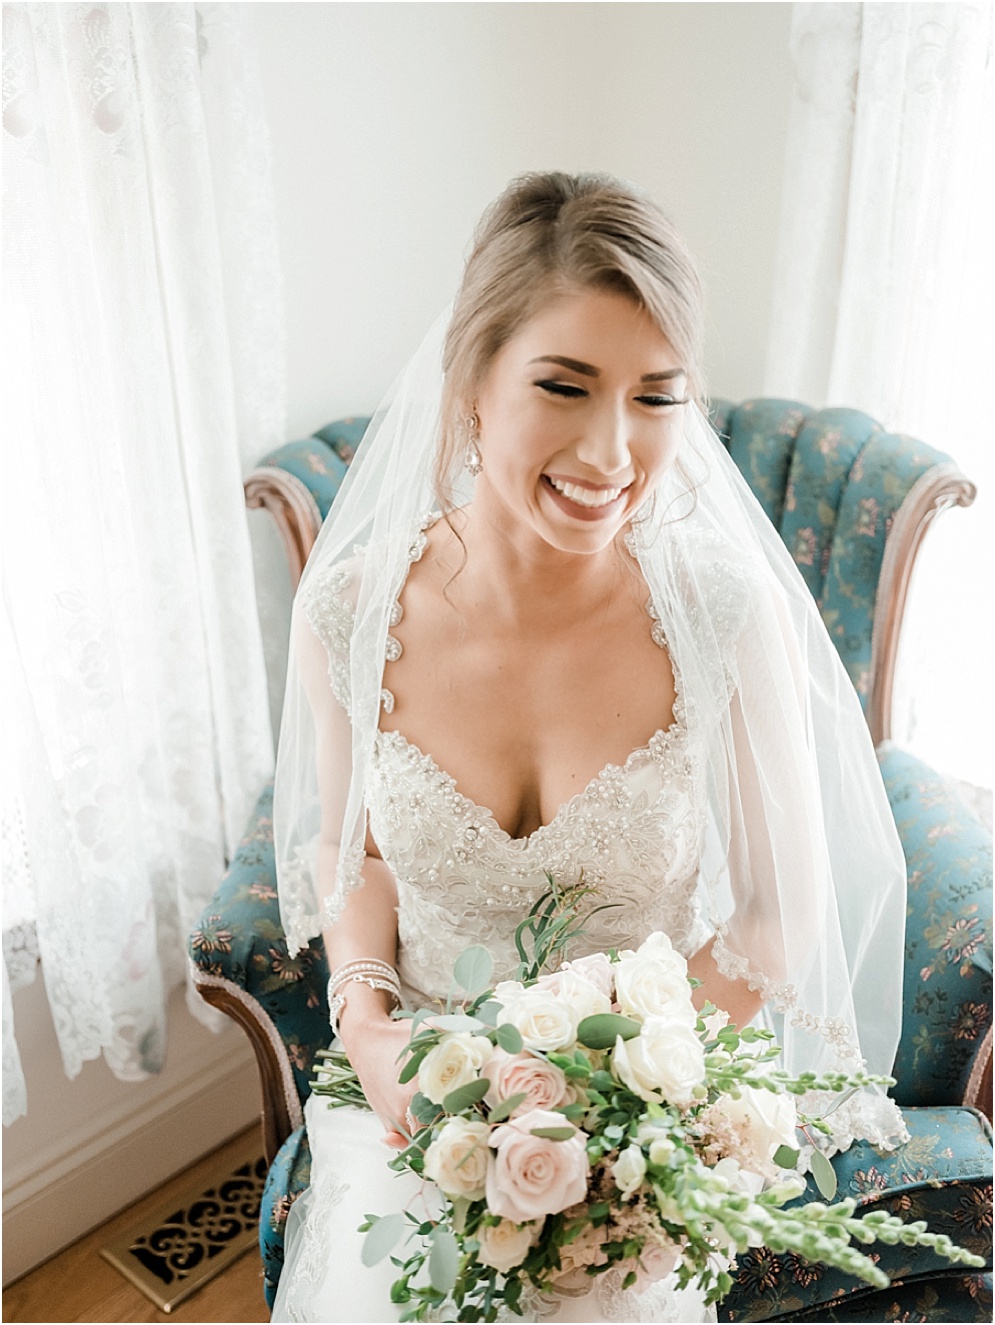 A simple, elegant backyard wedding in Annapolis, Maryland. Family is important to this couple so they focused on family throughout their wedding day.